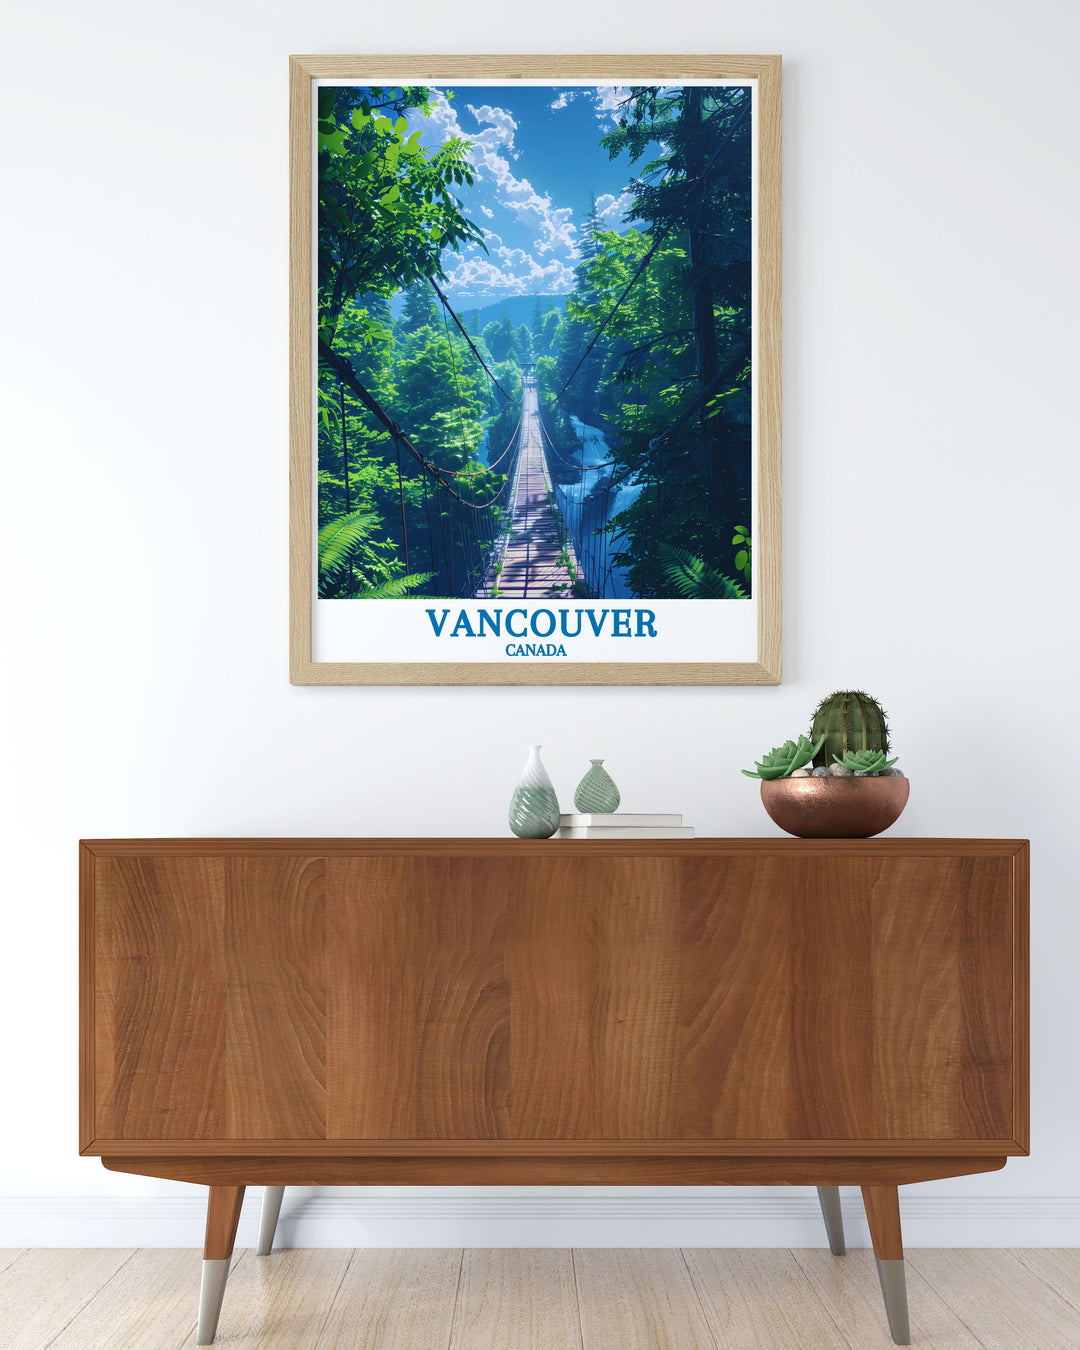 Enhance your living space with this detailed artwork of the Capilano Suspension Bridge. The print depicts the thrilling height and lush forest below, perfect for adding a touch of adventure and natural beauty to your home decor.